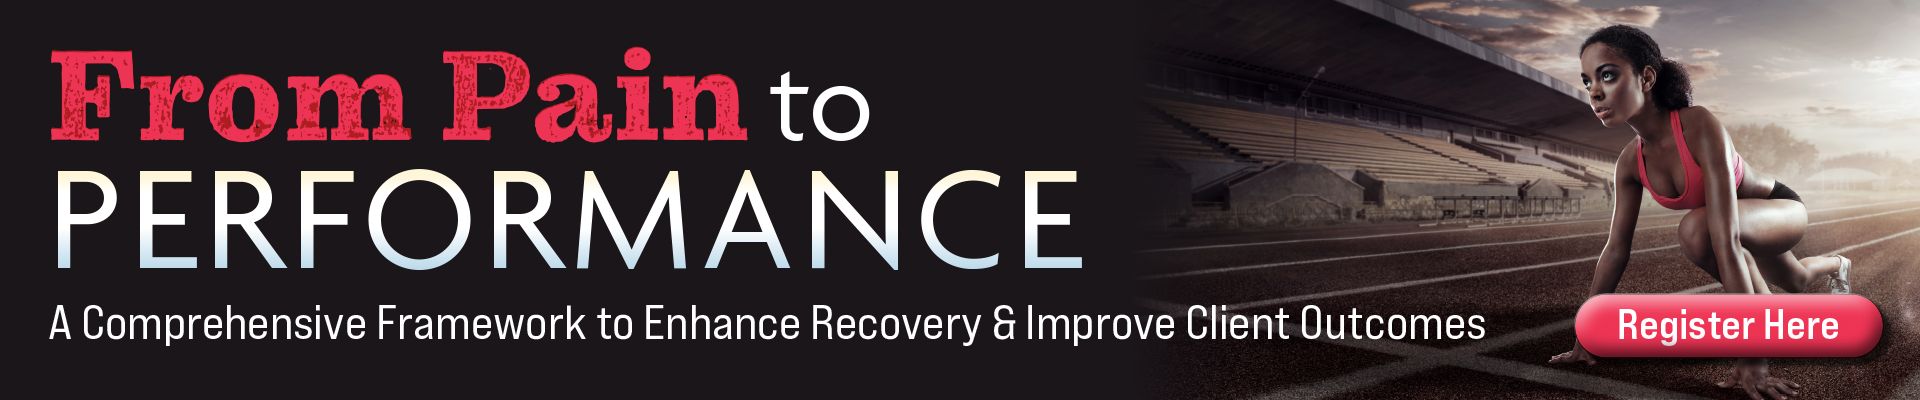 From Pain to Performance: A Comprehensive Framework to Enhance Recovery & Improve Client Outcomes